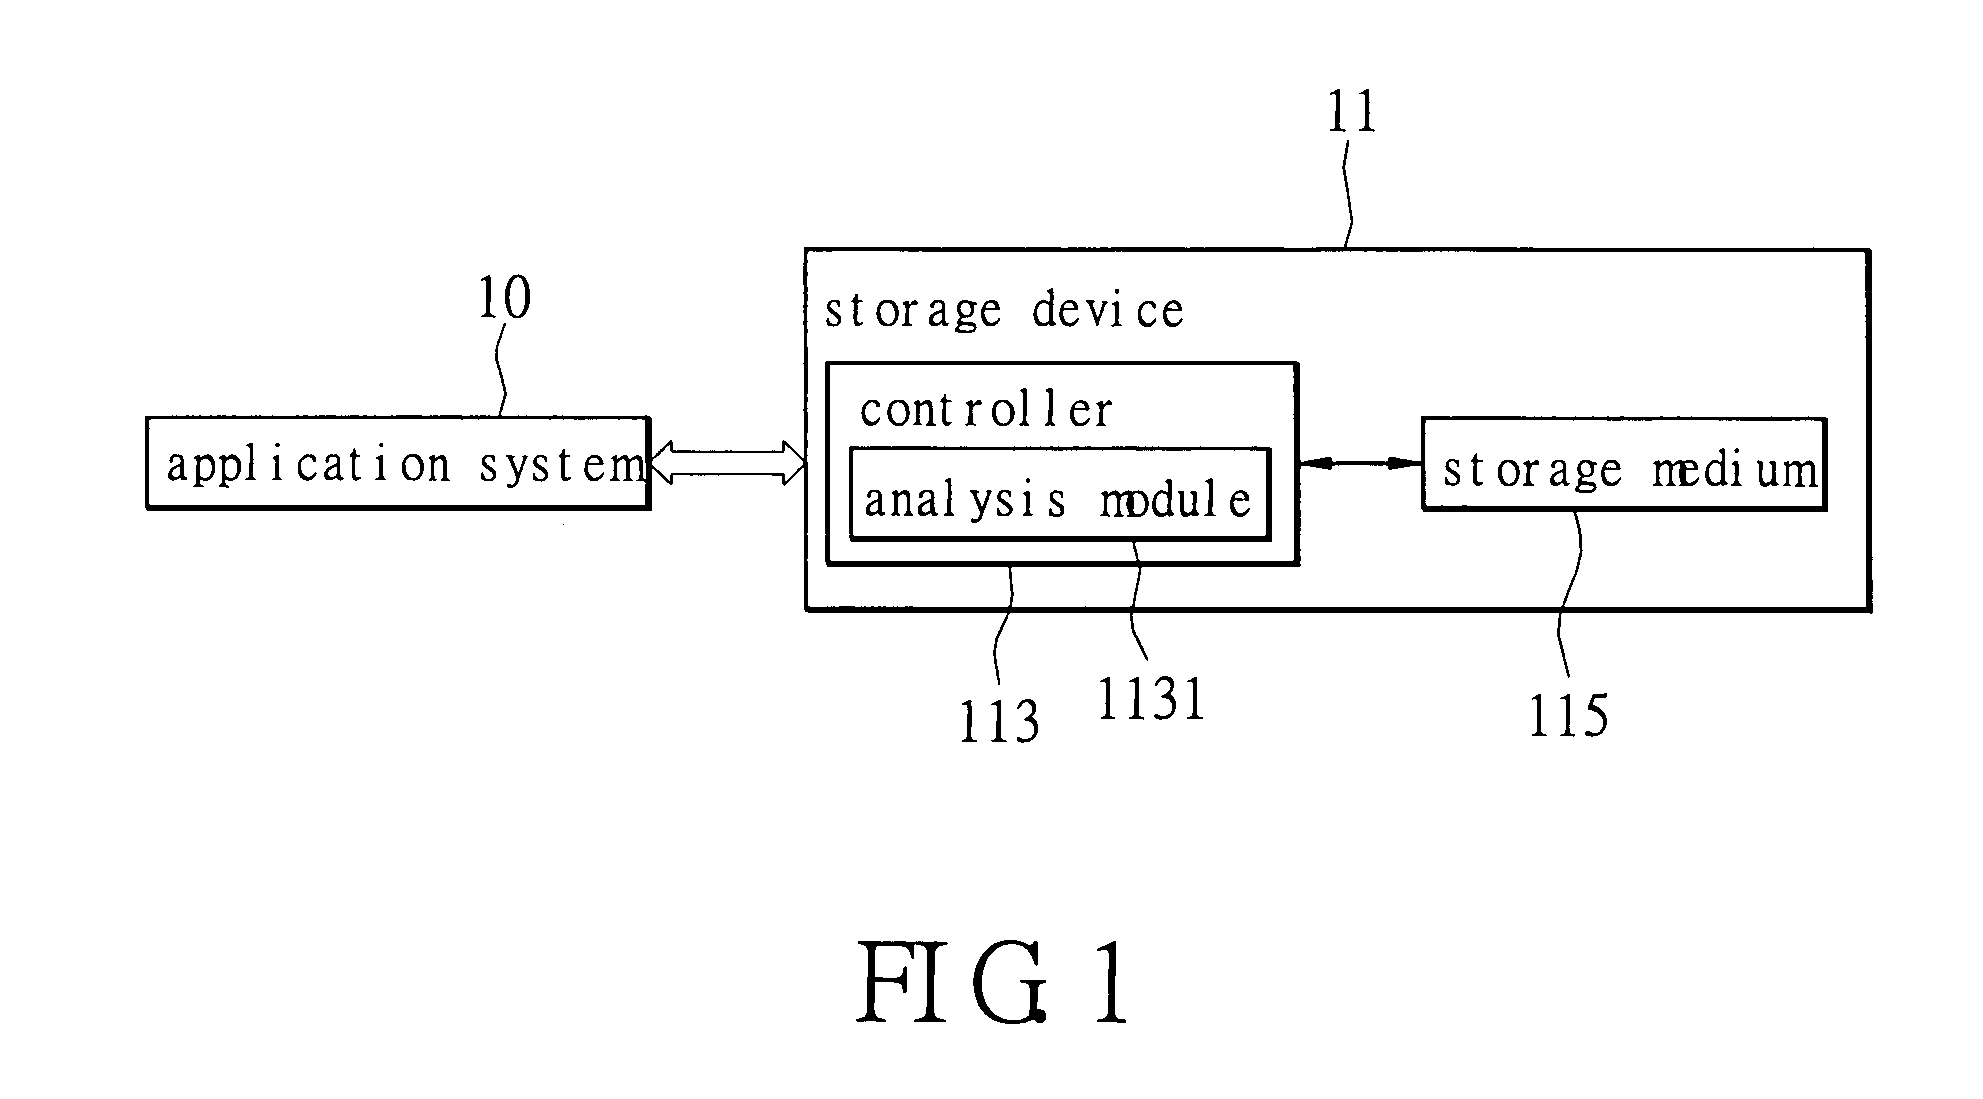 Method of setting a storage device